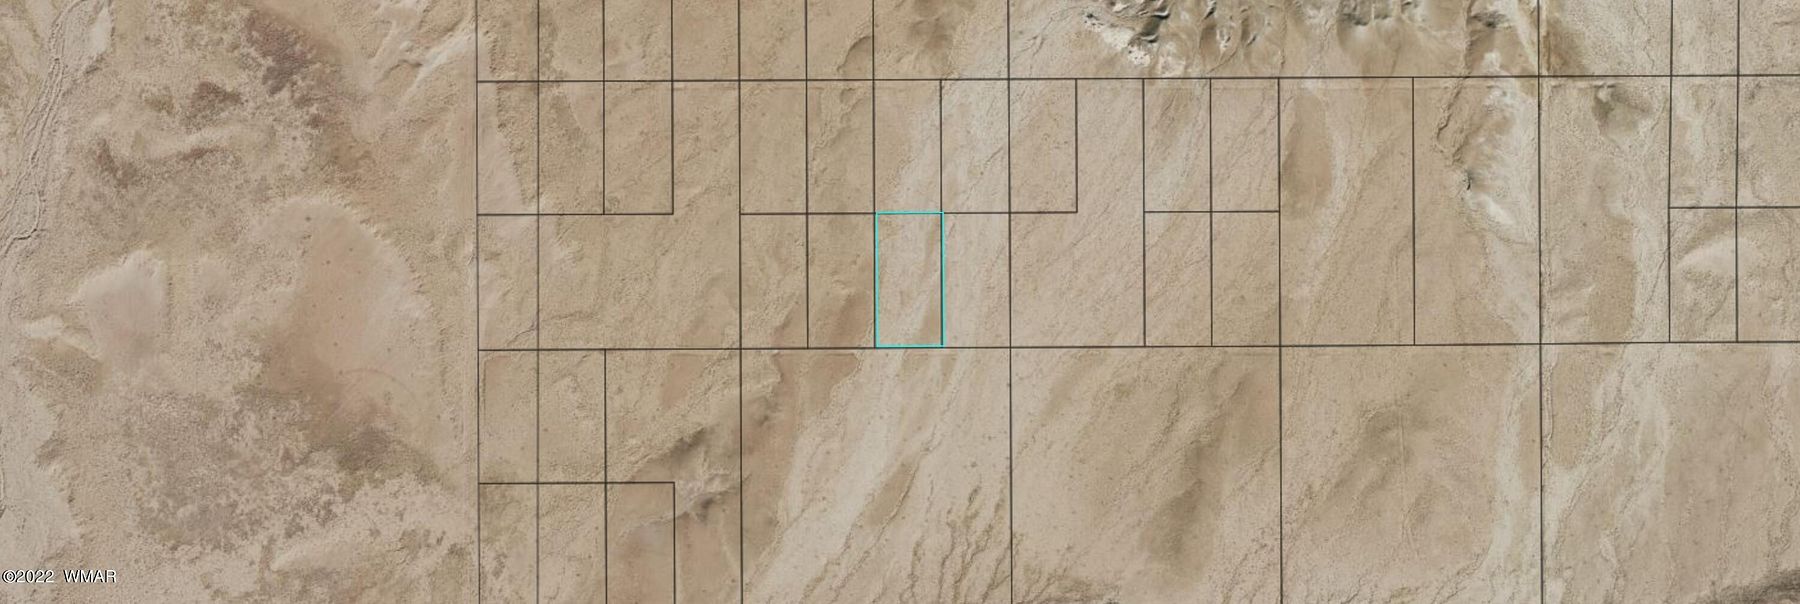 1.3 Acres of Land for Sale in Holbrook, Arizona